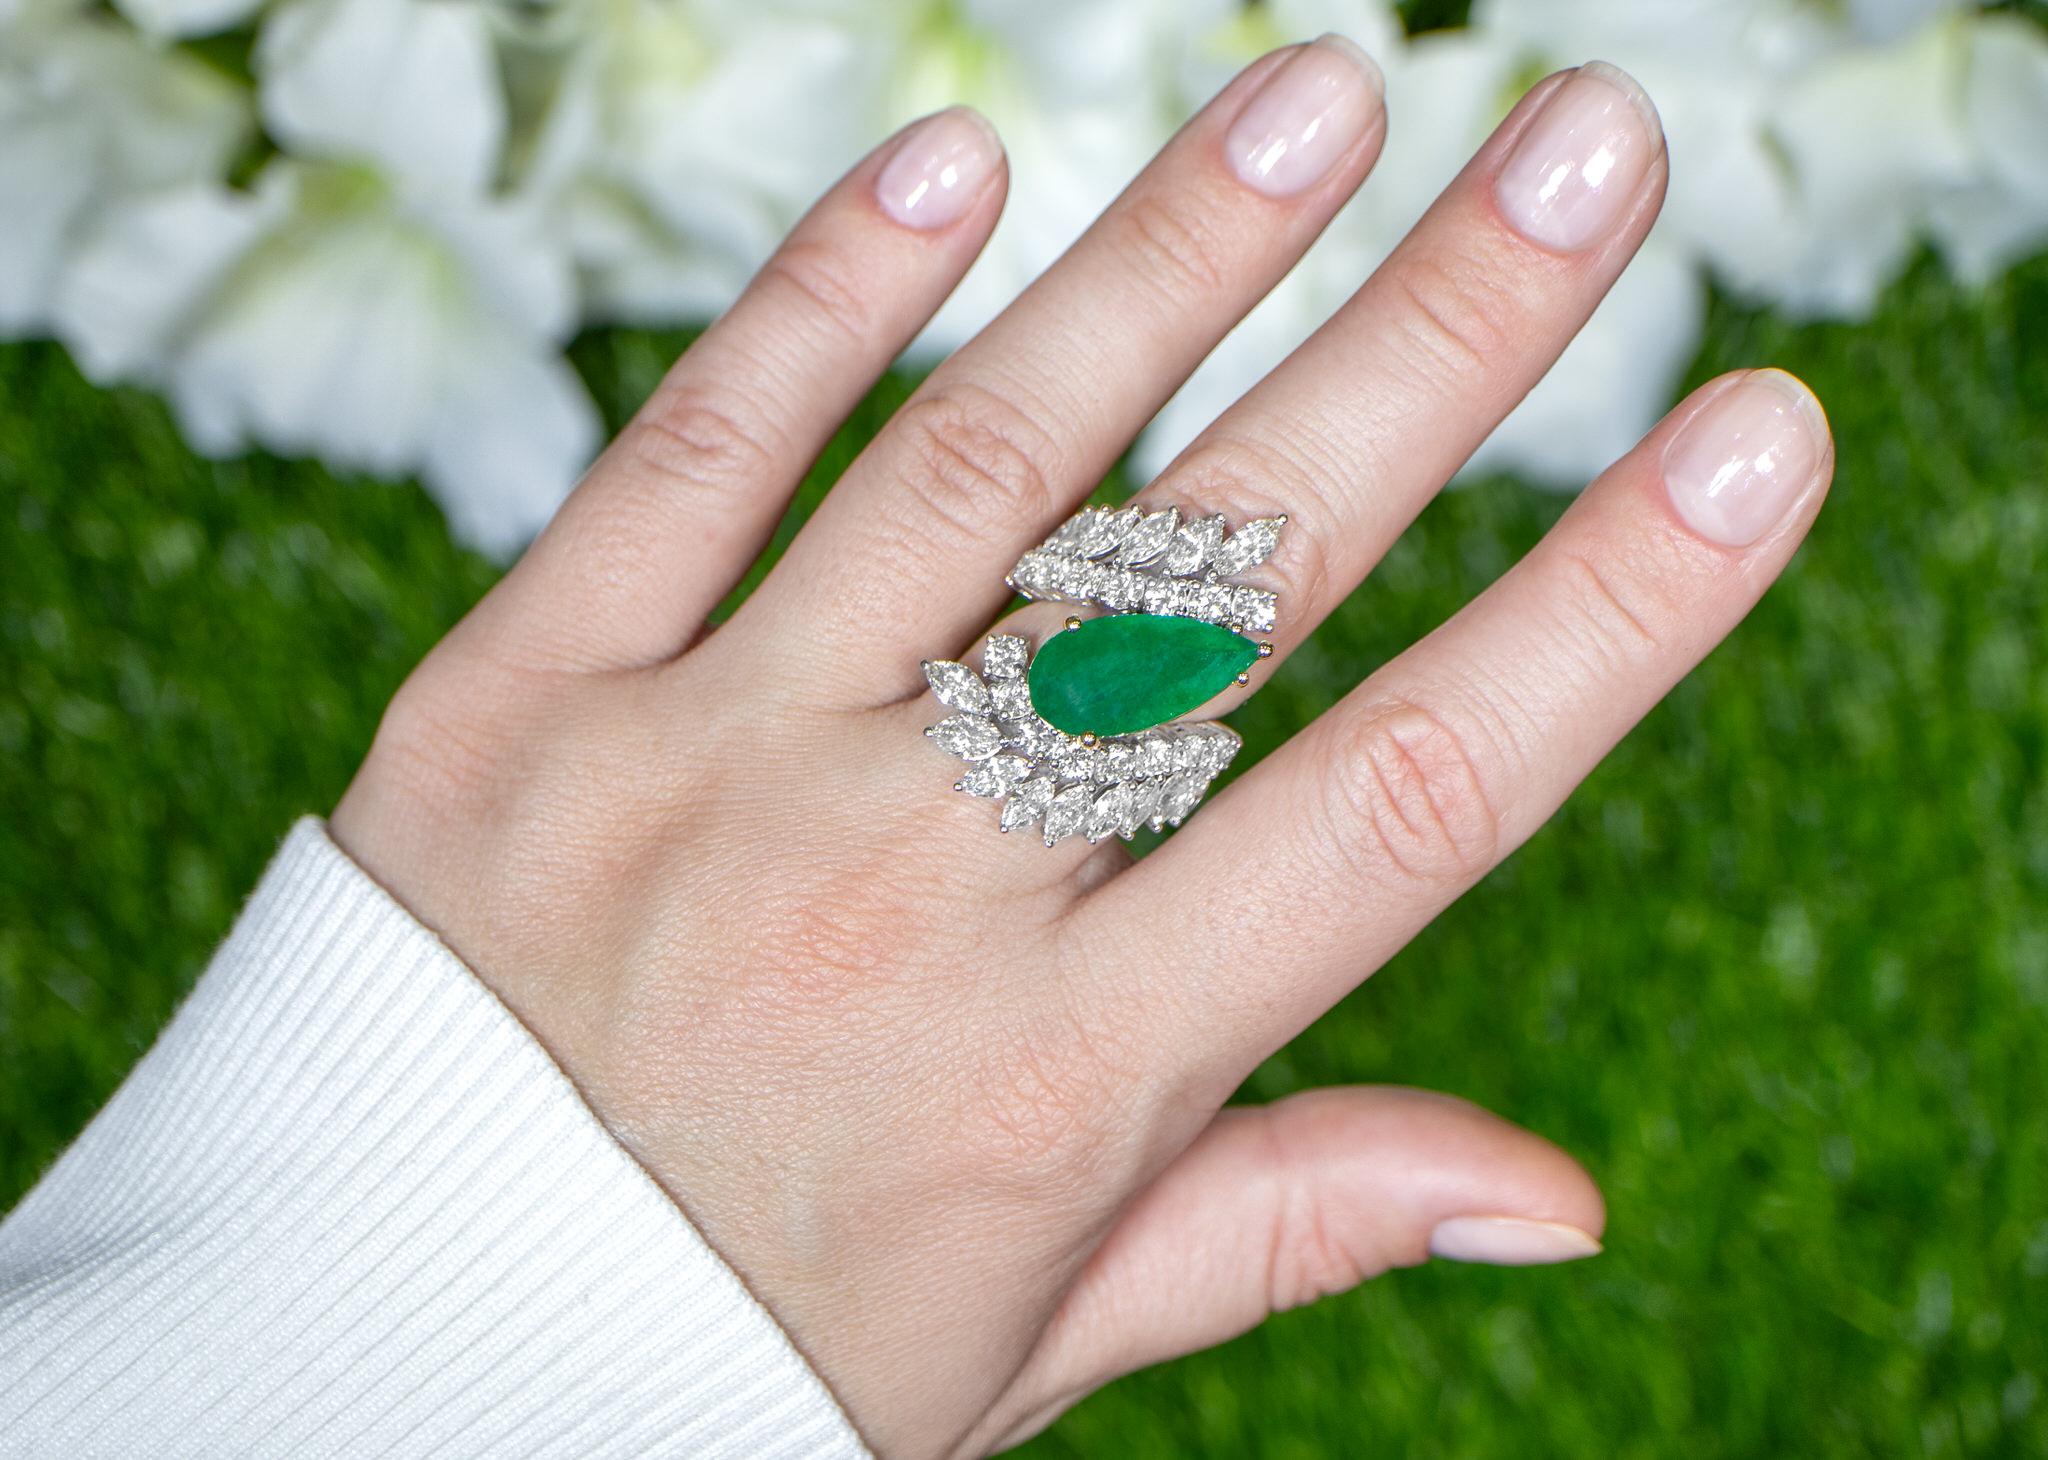 It comes with the Gemological Appraisal by GIA GG/AJP
All Gemstones are Natural
Emerald = 5.44 Carat
Diamonds = 5.64 Carats
Metal: 18K Gold
Ring Size: 7* US
*It can be resized complimentary